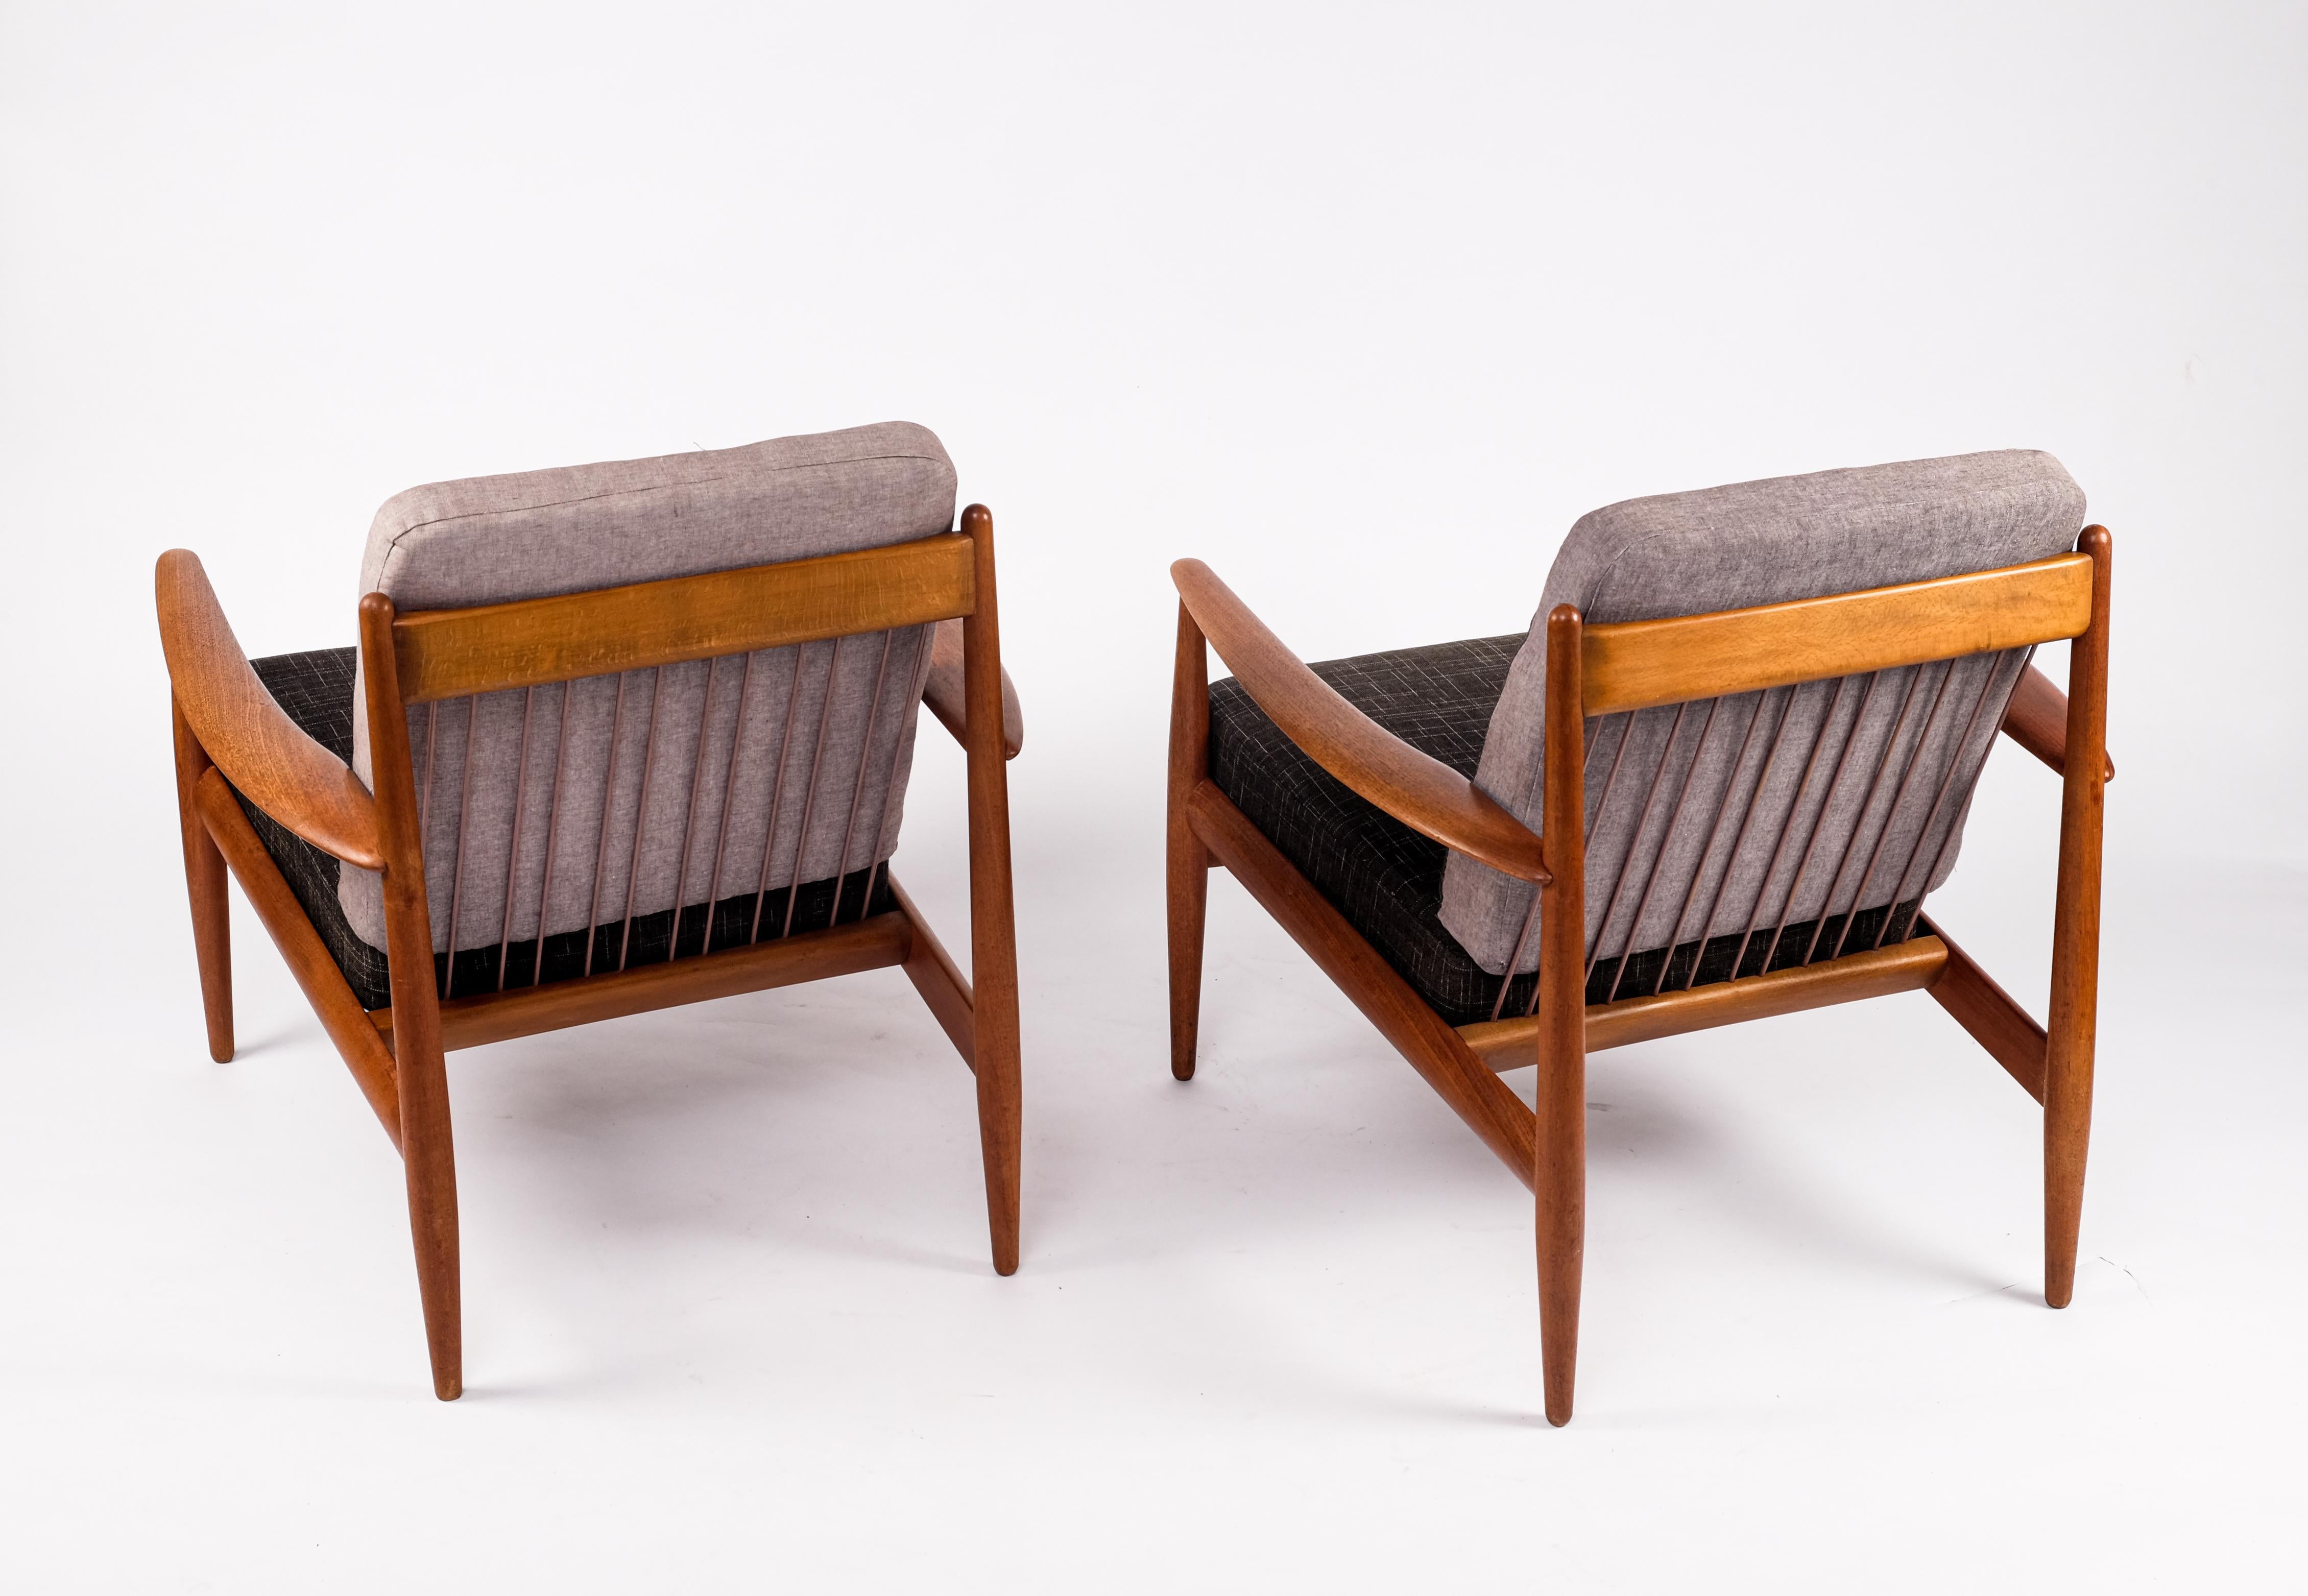 Pair of easy chairs by Grete Jalk, Denmark, 1960s.